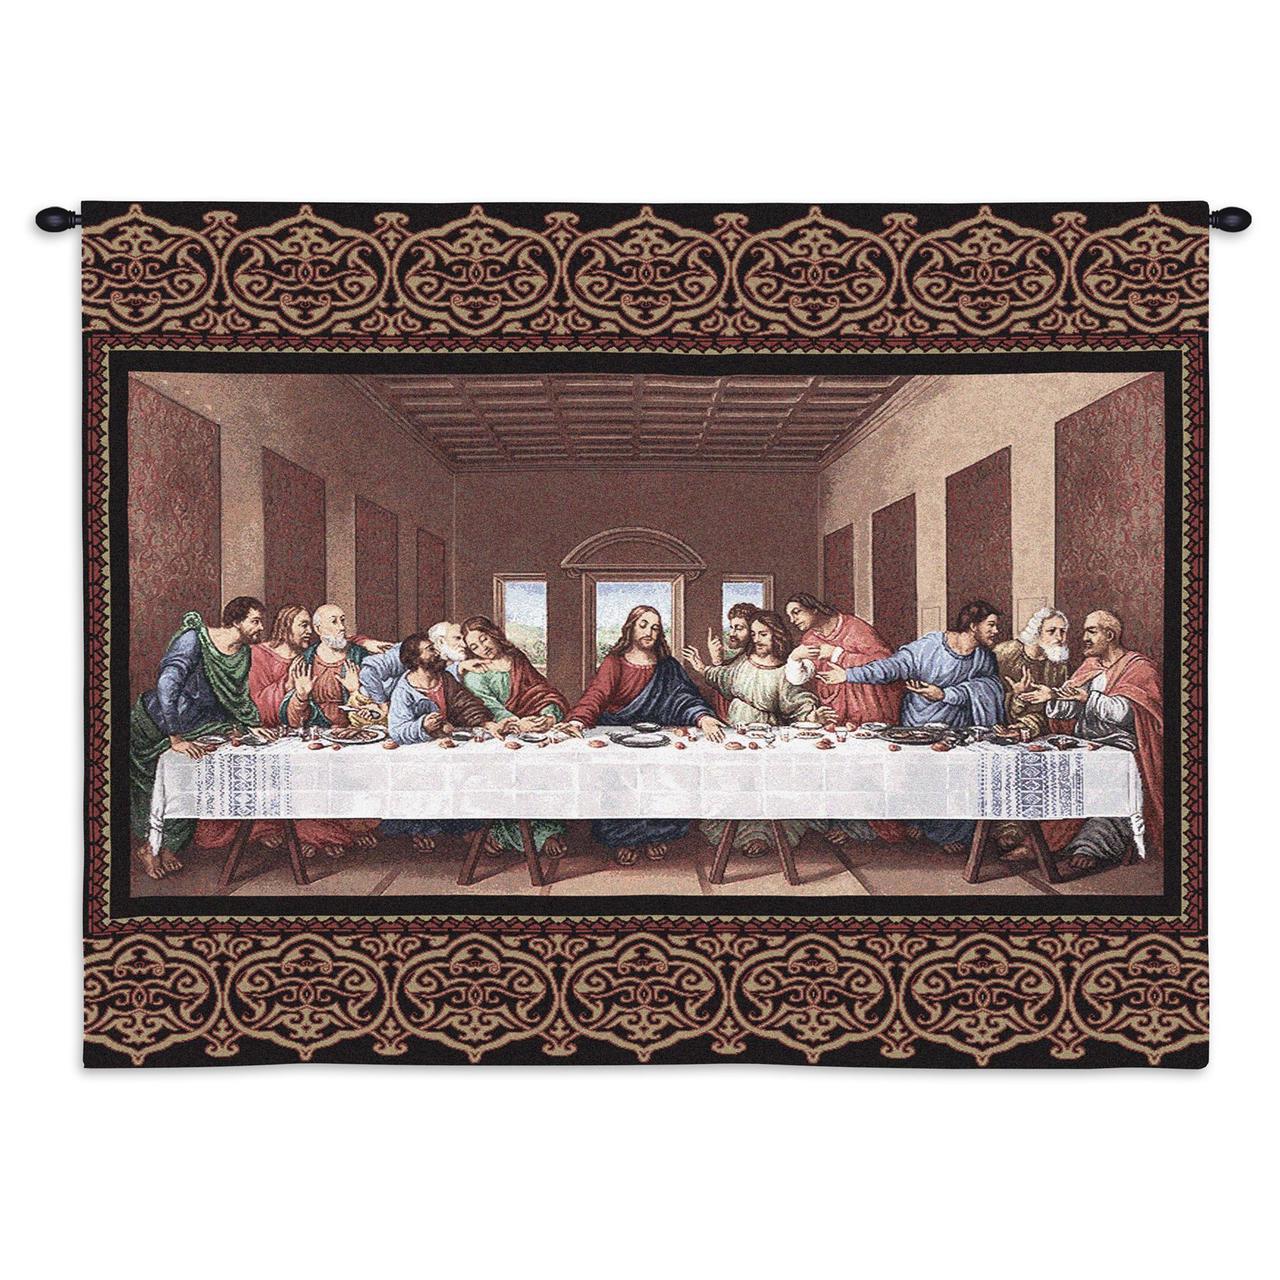 Christian Decor Choice Tapestry Wall Hanging Throw The Last Supper